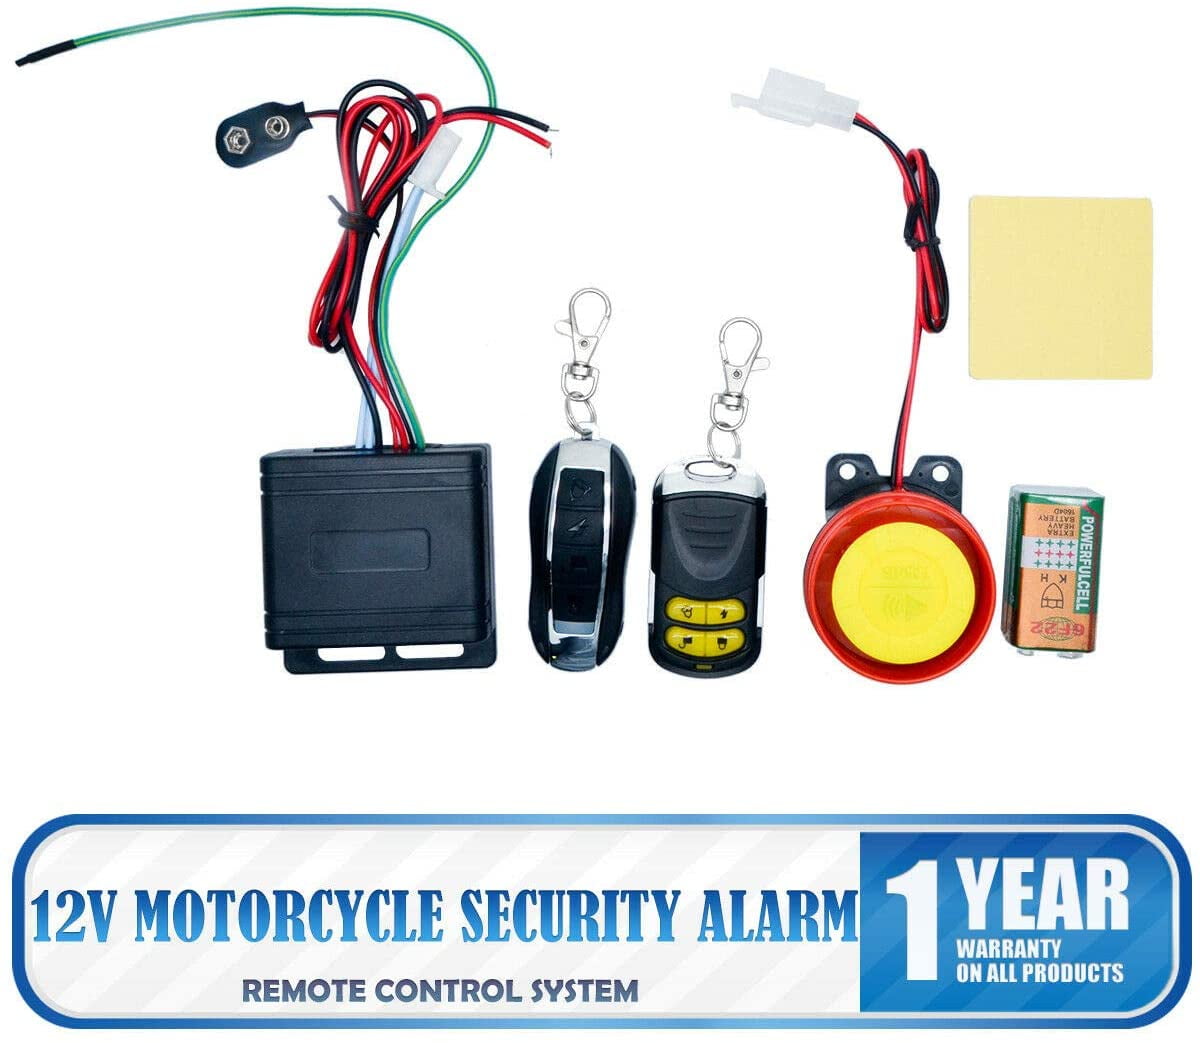 Details about   2-Way Security Alarm System Unique Anti-theft Remote Control Engine Motor Parts 